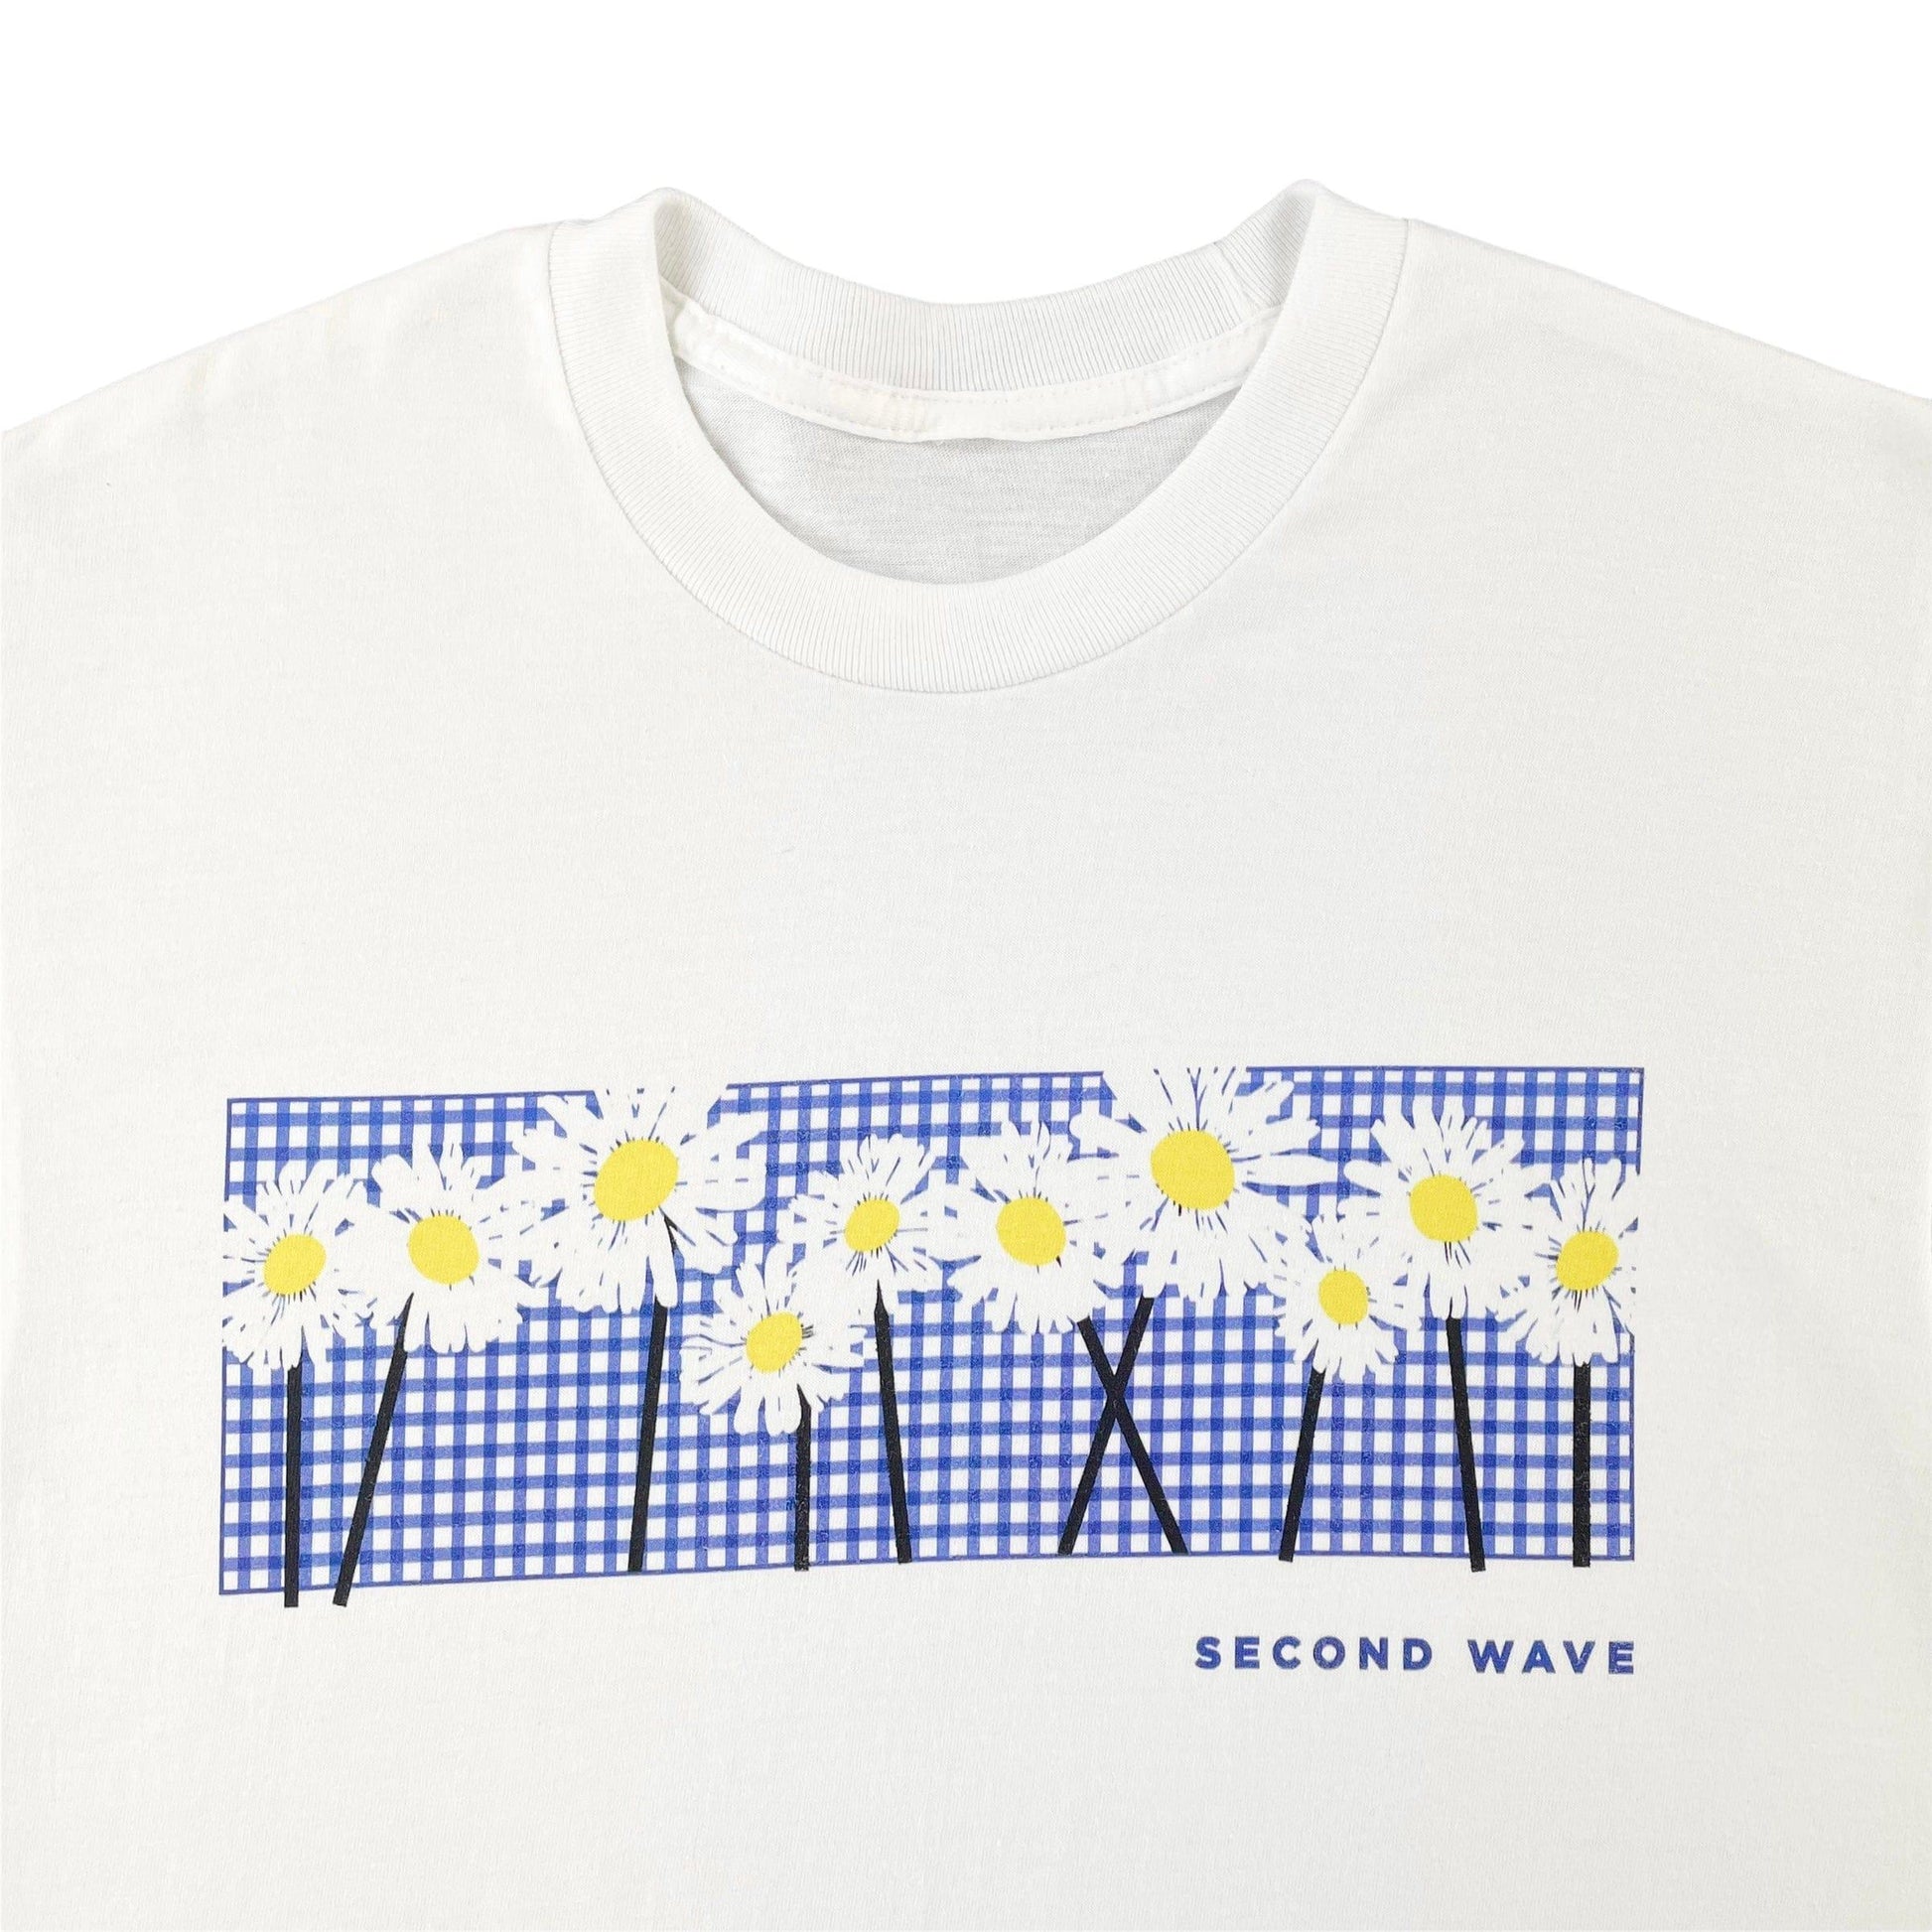 Second Wave flower grid t shirt - Known Source